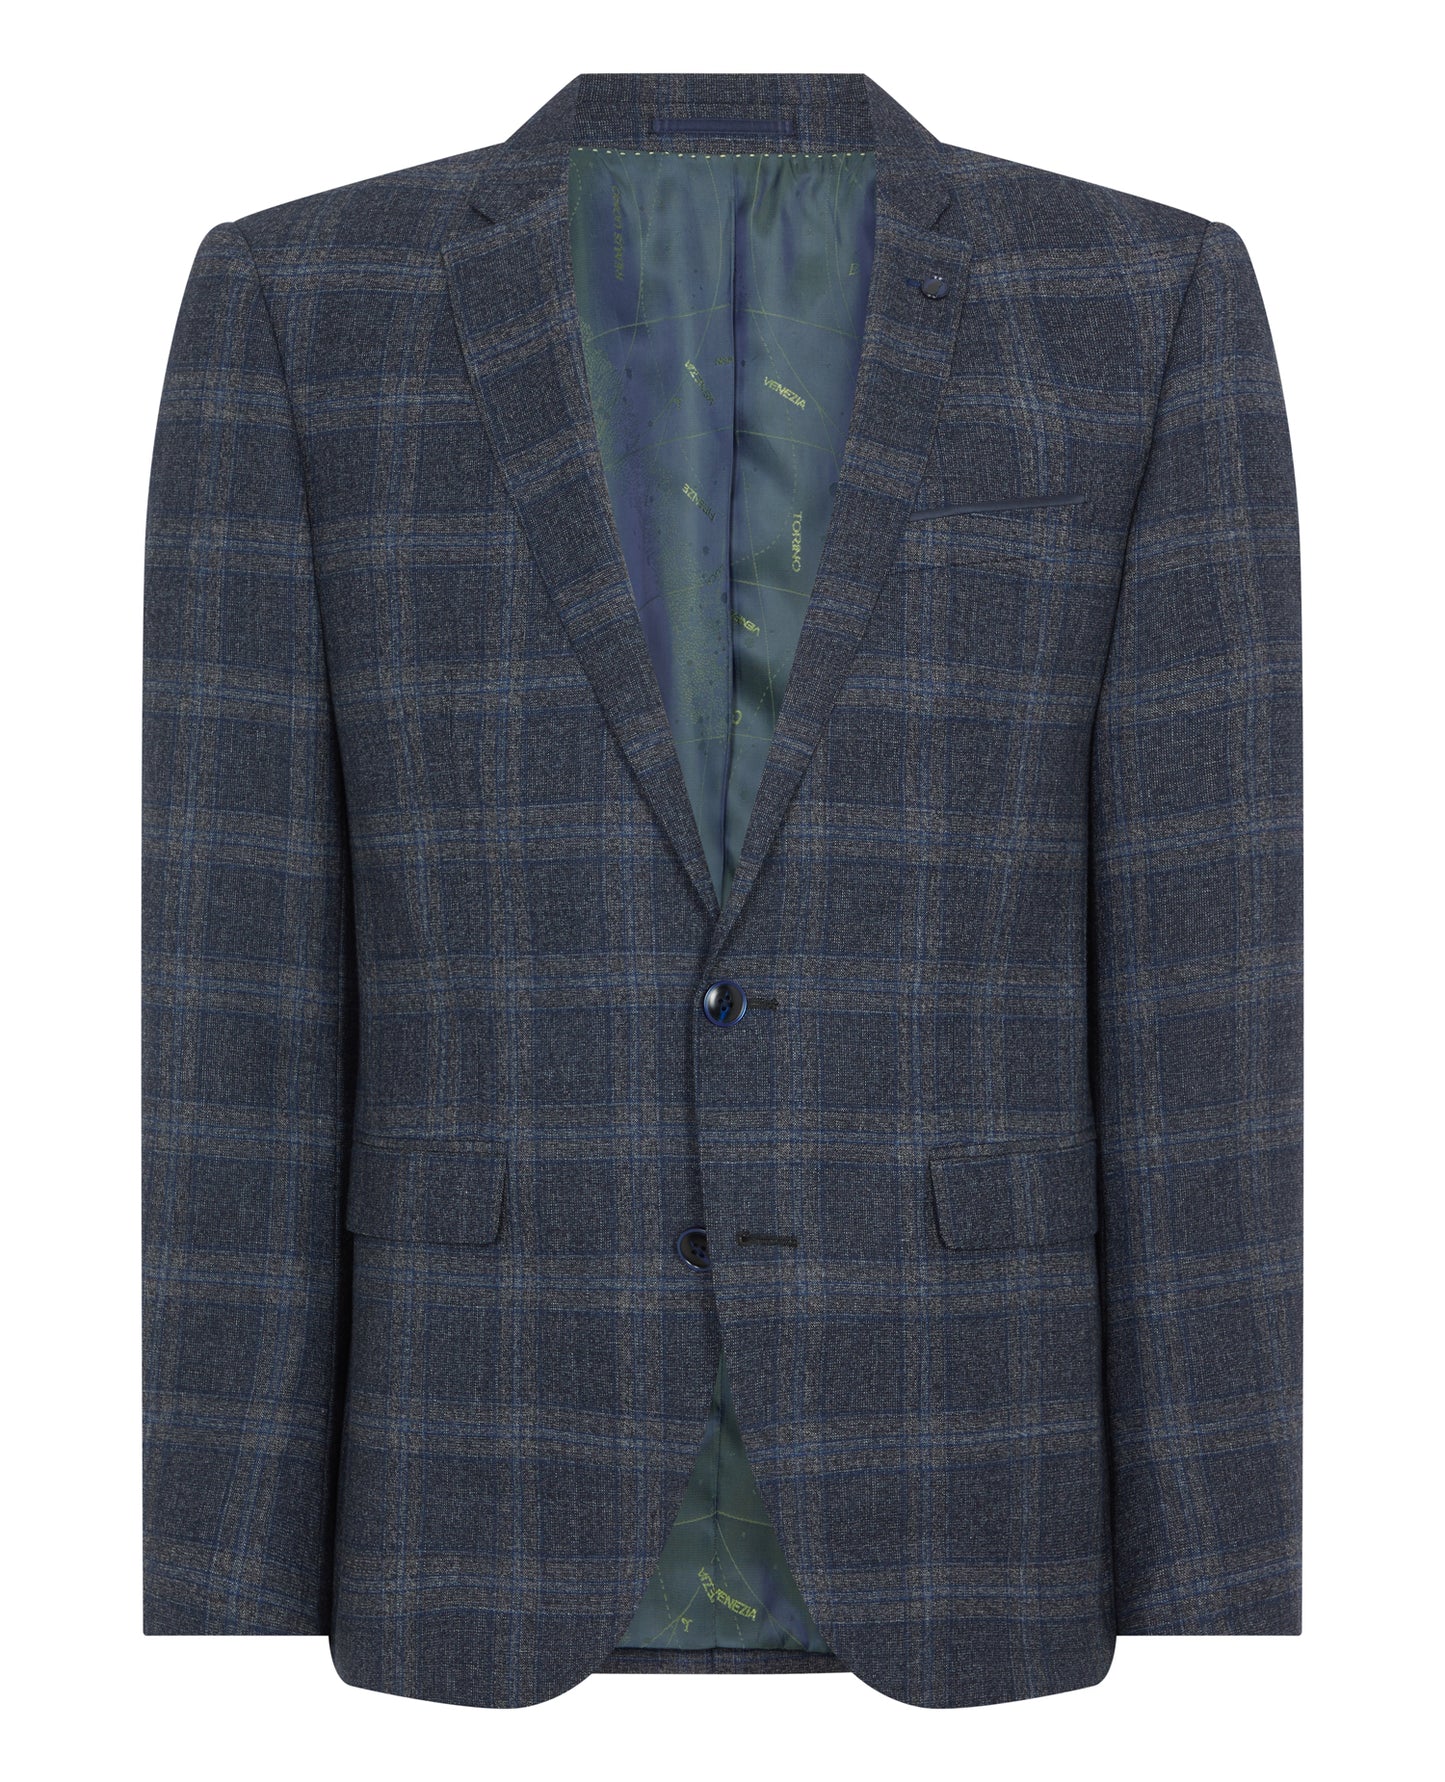 Remus Uomo Mix and Match Check Suit Jacket